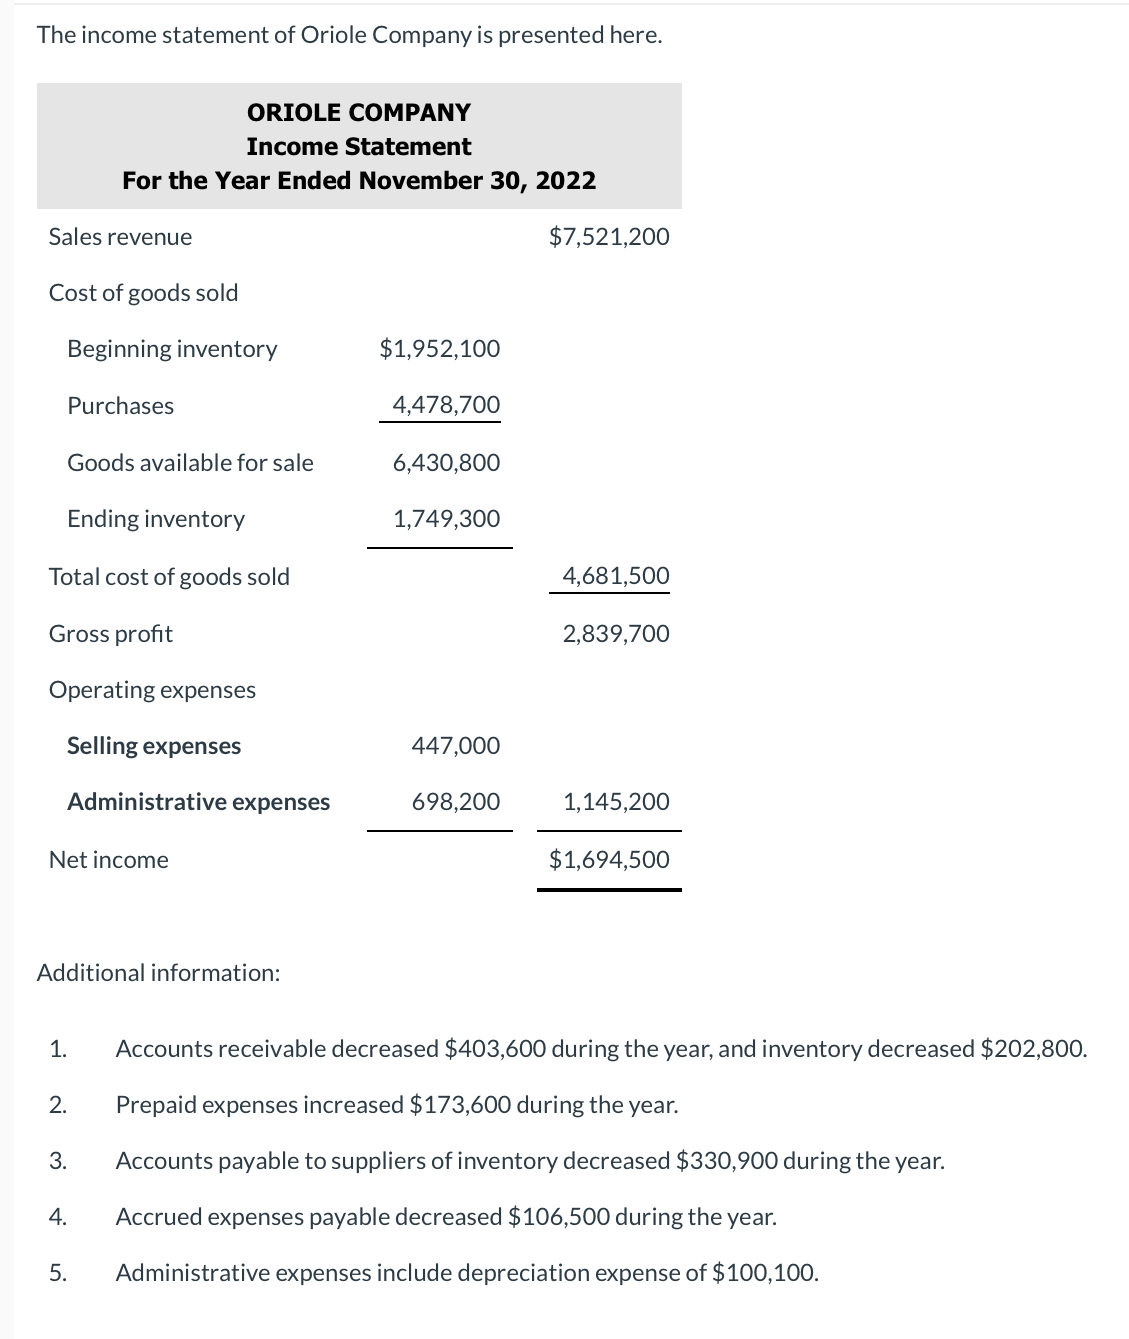 The income statement of Oriole Company is presented here.
Sales revenue
Cost of goods sold
Beginning inventory
Purchases
Goods available for sale
Ending inventory
Total cost of goods sold
Gross profit
Operating expenses
Selling expenses
ORIOLE COMPANY
Income Statement
For the Year Ended November 30, 2022
Administrative expenses
Net income
Additional information:
1.
2.
3.
4.
5.
$1,952,100
4,478,700
6,430,800
1,749,300
447,000
698,200
$7,521,200
4,681,500
2,839,700
1,145,200
$1,694,500
Accounts receivable decreased $403,600 during the year, and inventory decreased $202,800.
Prepaid expenses increased $173,600 during the year.
Accounts payable to suppliers of inventory decreased $330,900 during the year.
Accrued expenses payable decreased $106,500 during the year.
Administrative expenses include depreciation expense of $100,100.